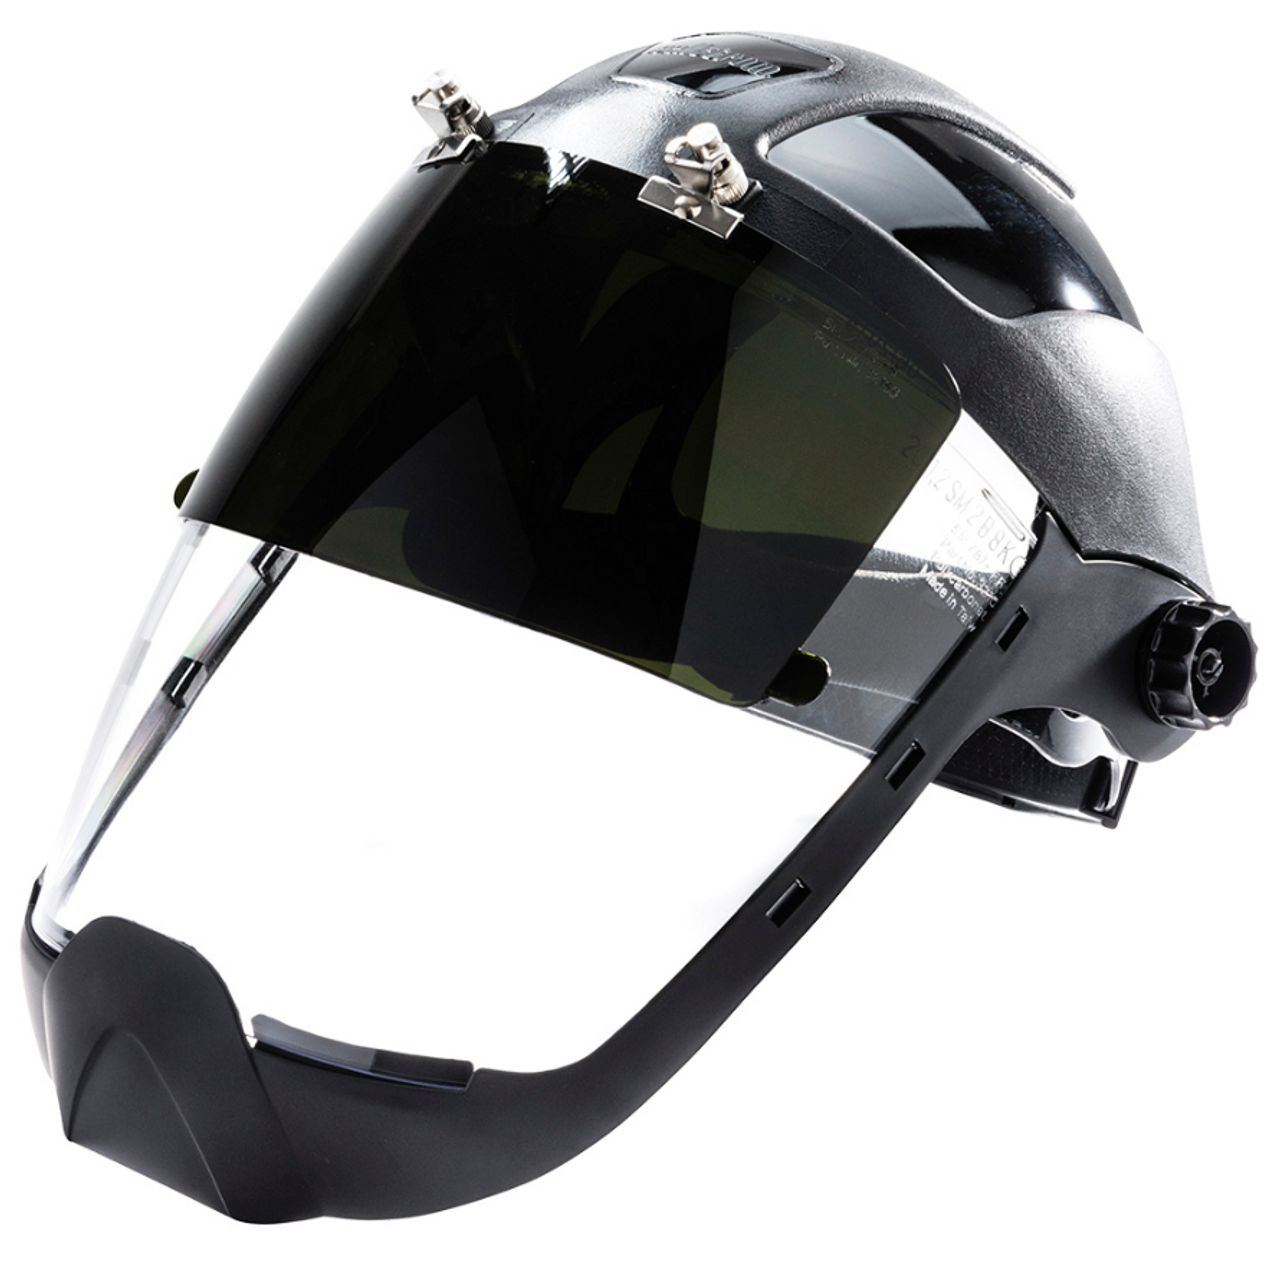 Sellstrom® DP4 Series Black Crown & Chin Guard - Sta-Clear® AF/AS Face Shield & Ratcheting Headgear - IR 8.0 Flip-Up Visor  S32281